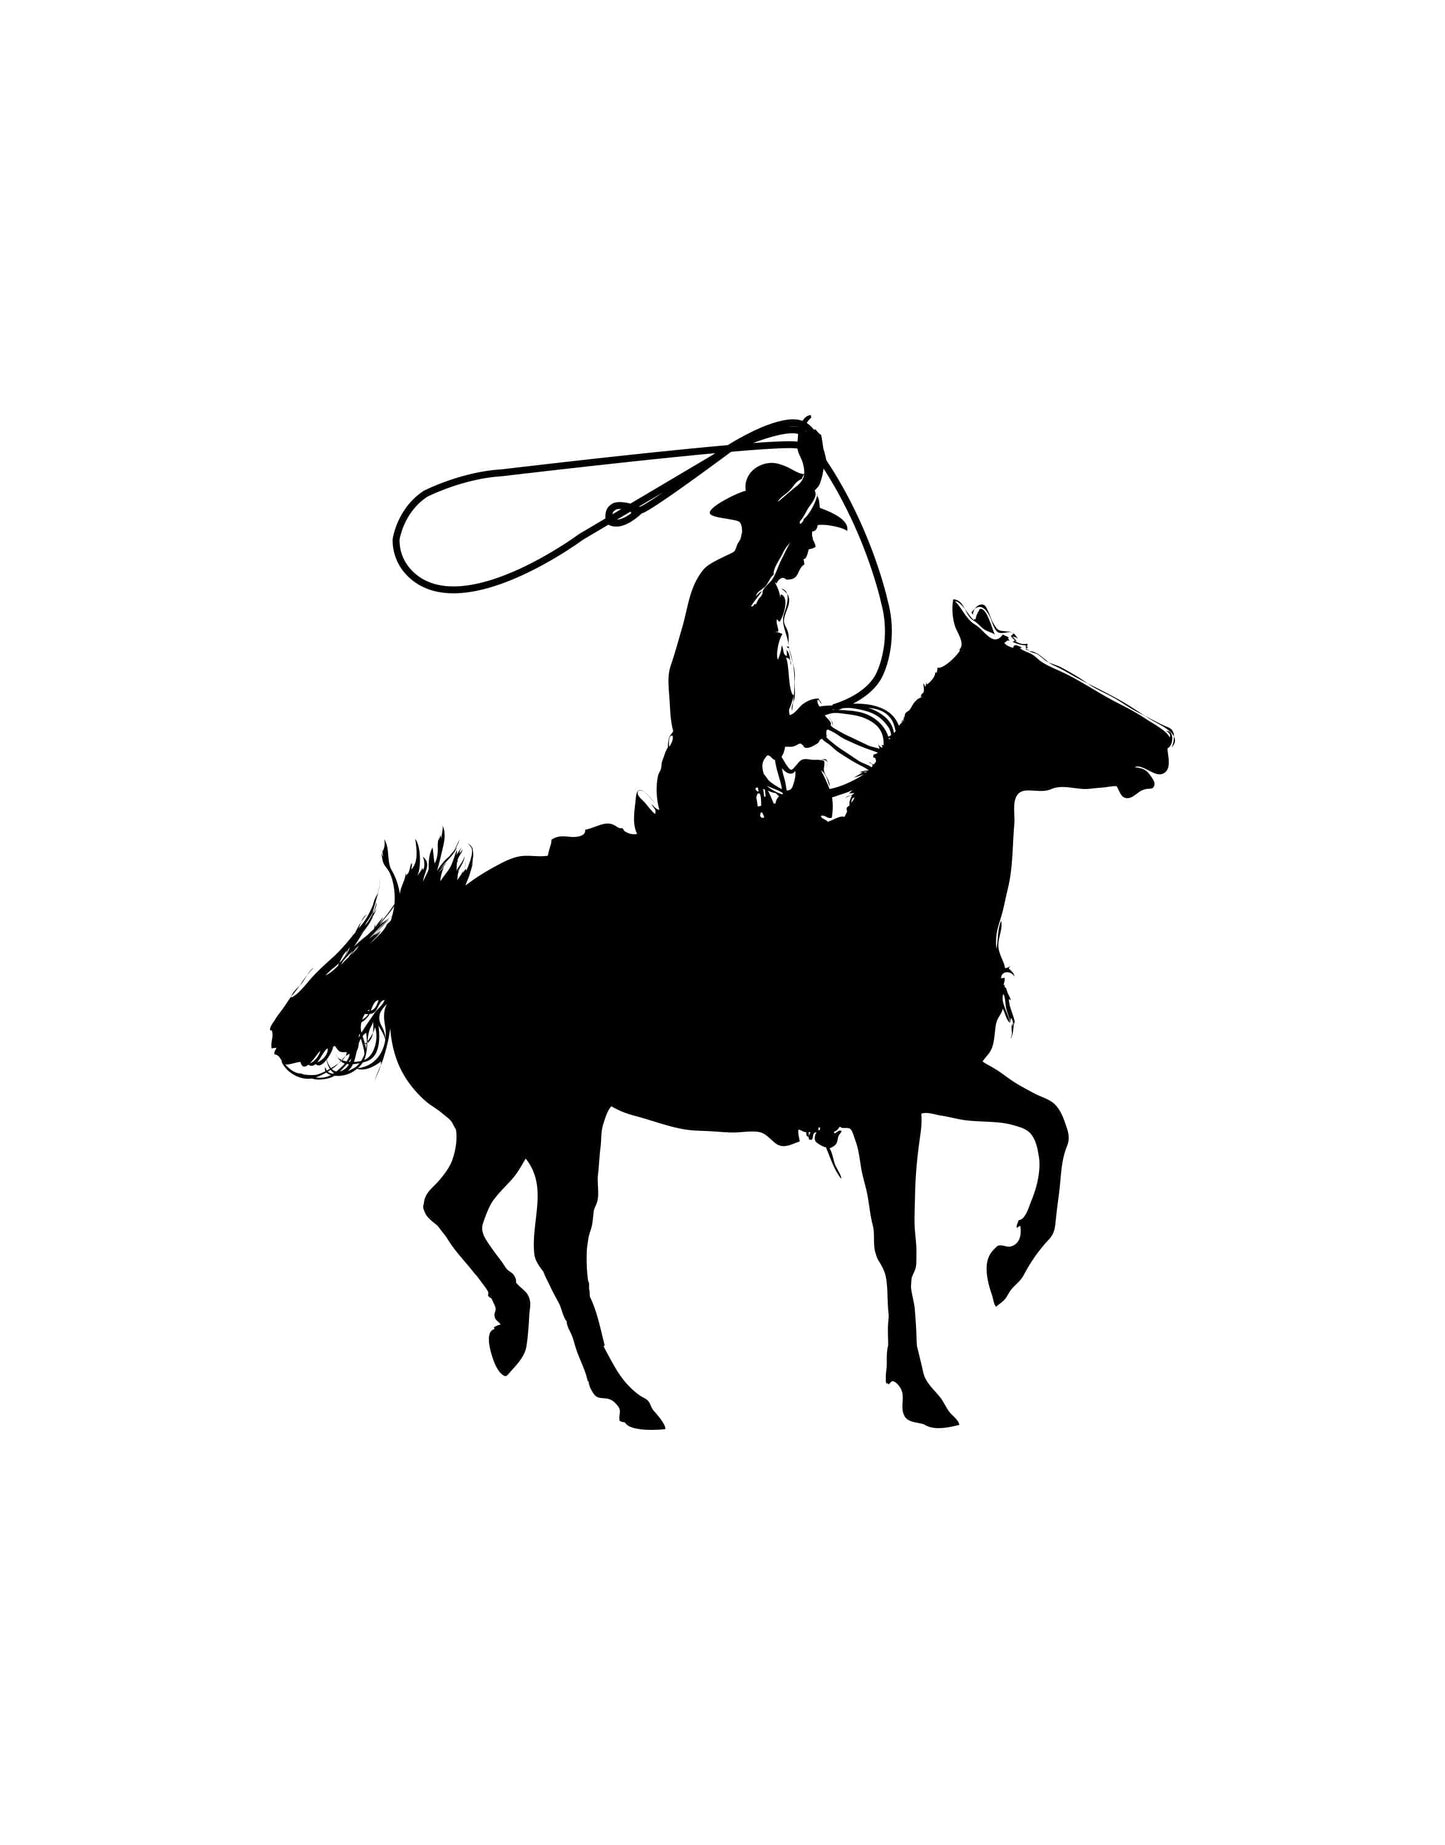 Cowboy Roping Wall Decal Sticker. Western Country Theme Decor. #AC183